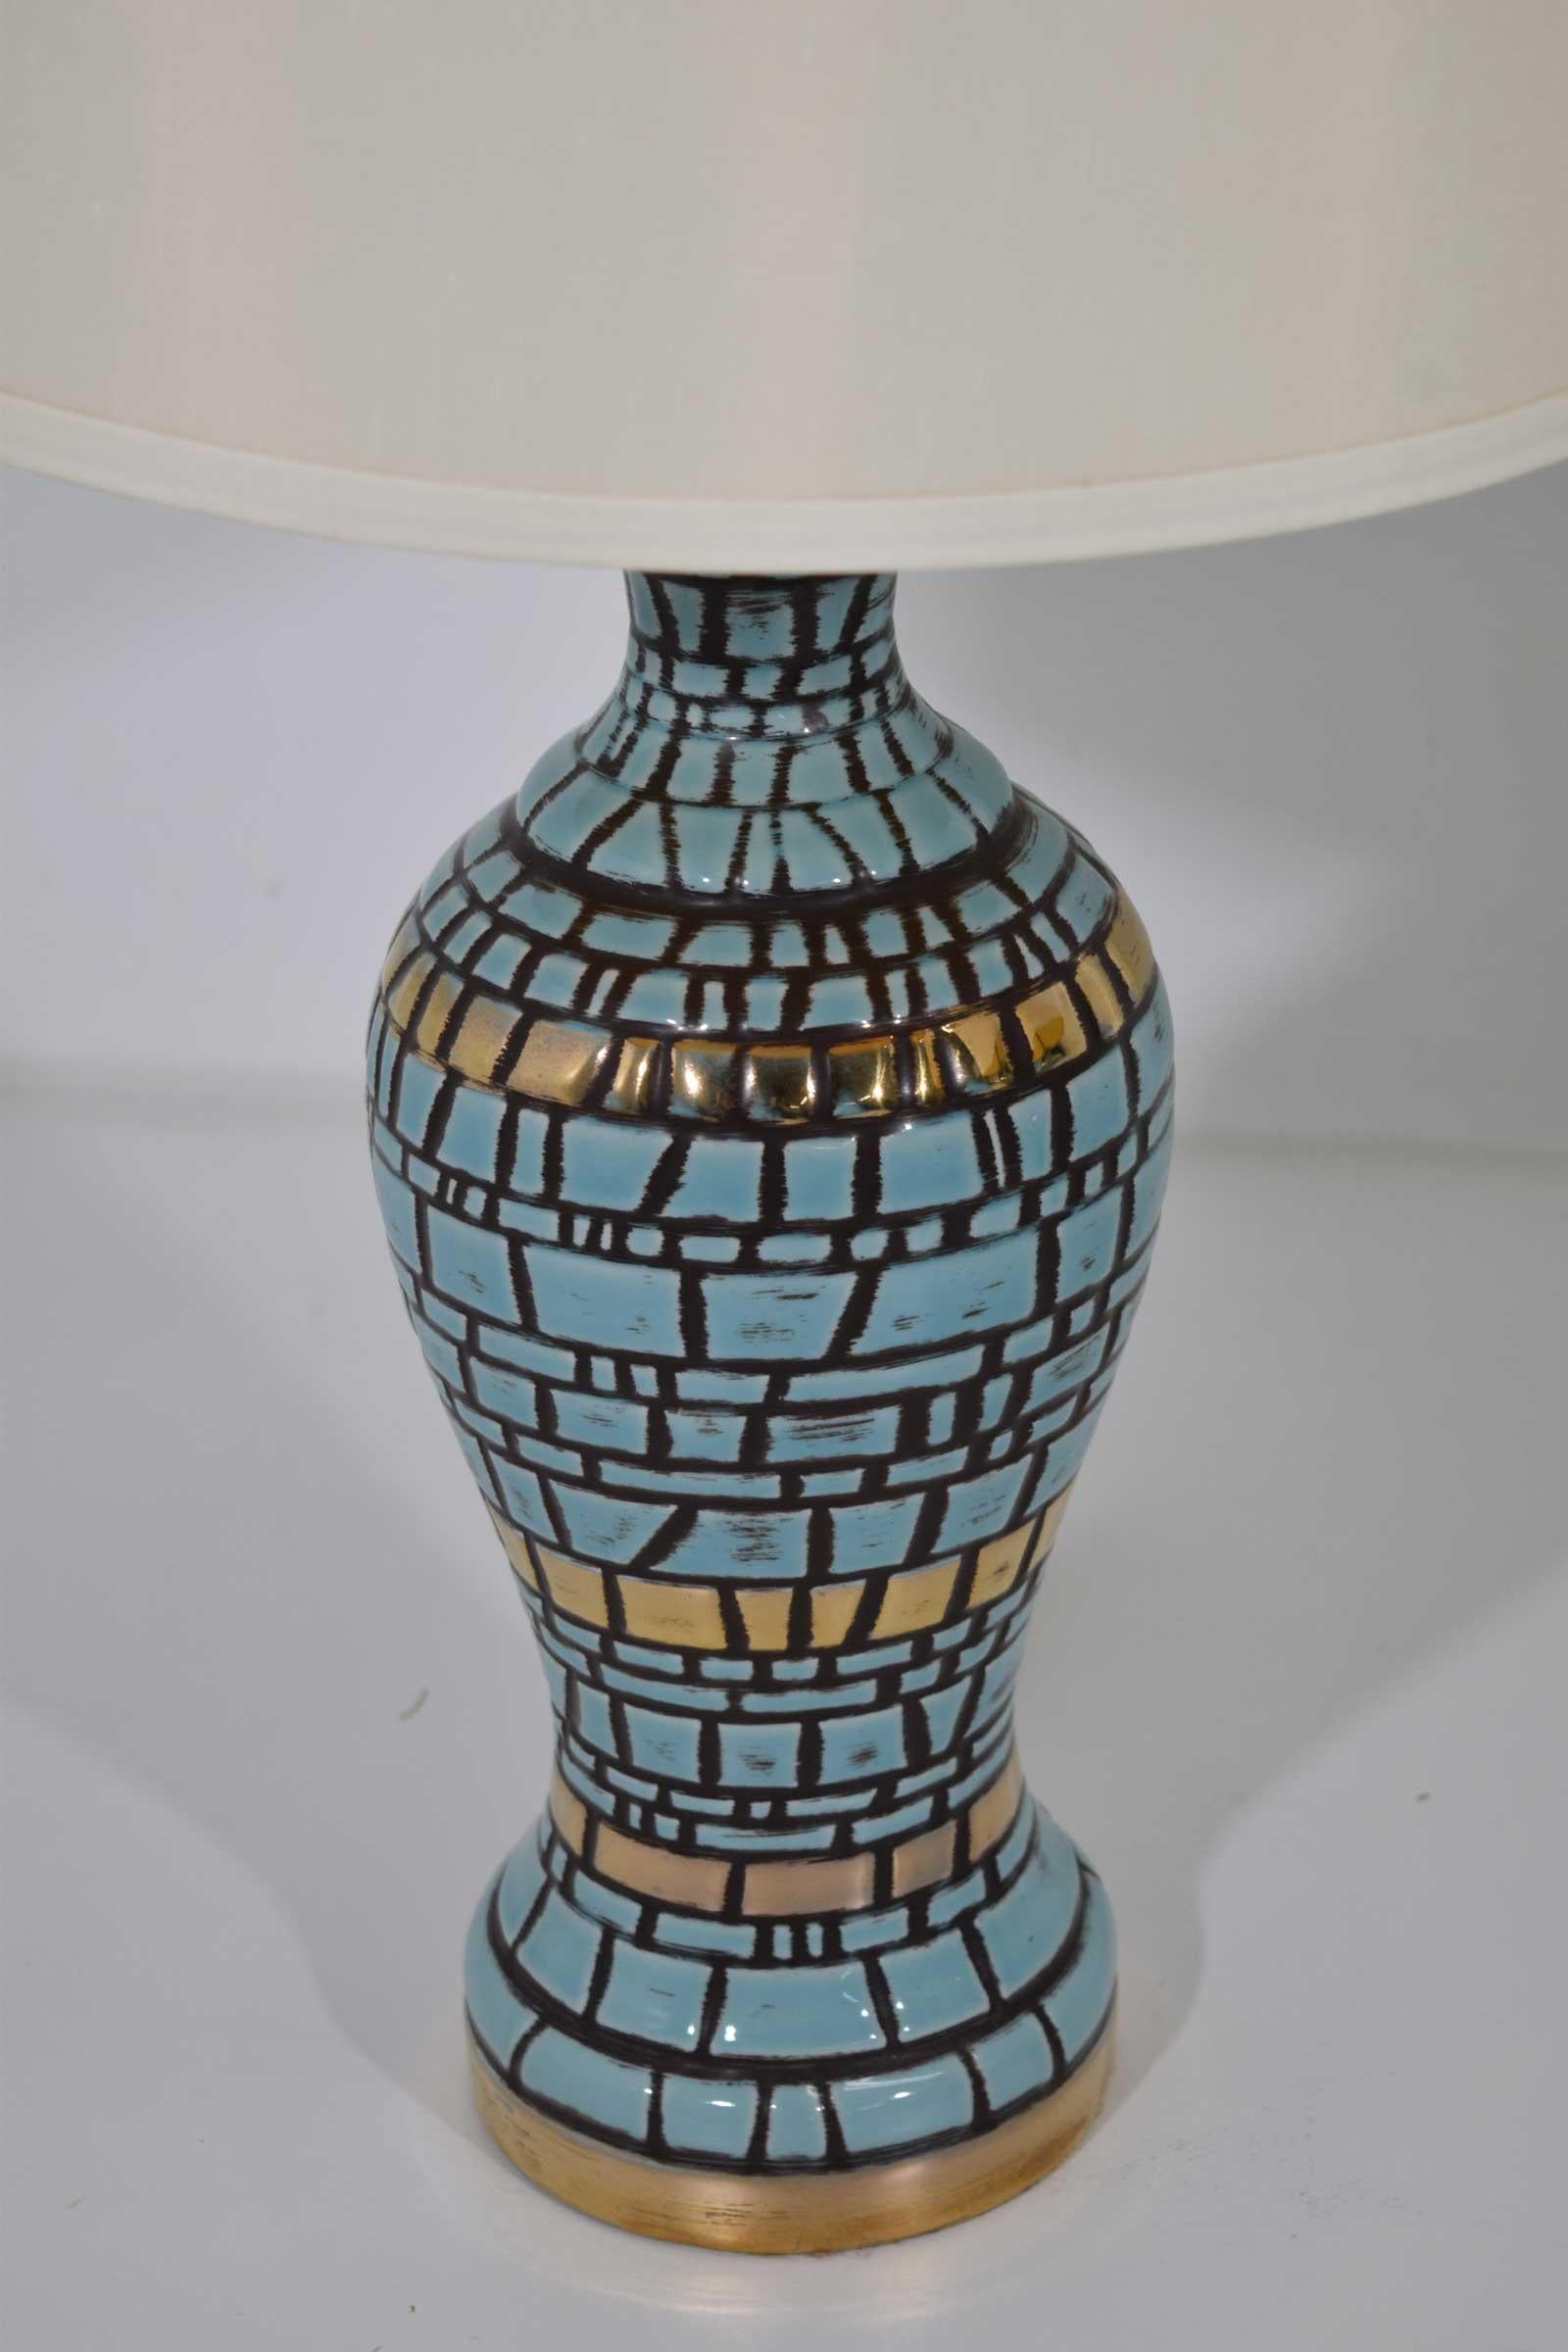 Very pretty lamps in ceramic tiles in turquoise with gold accents. Measurements are to top of harp and diameter is the shade.